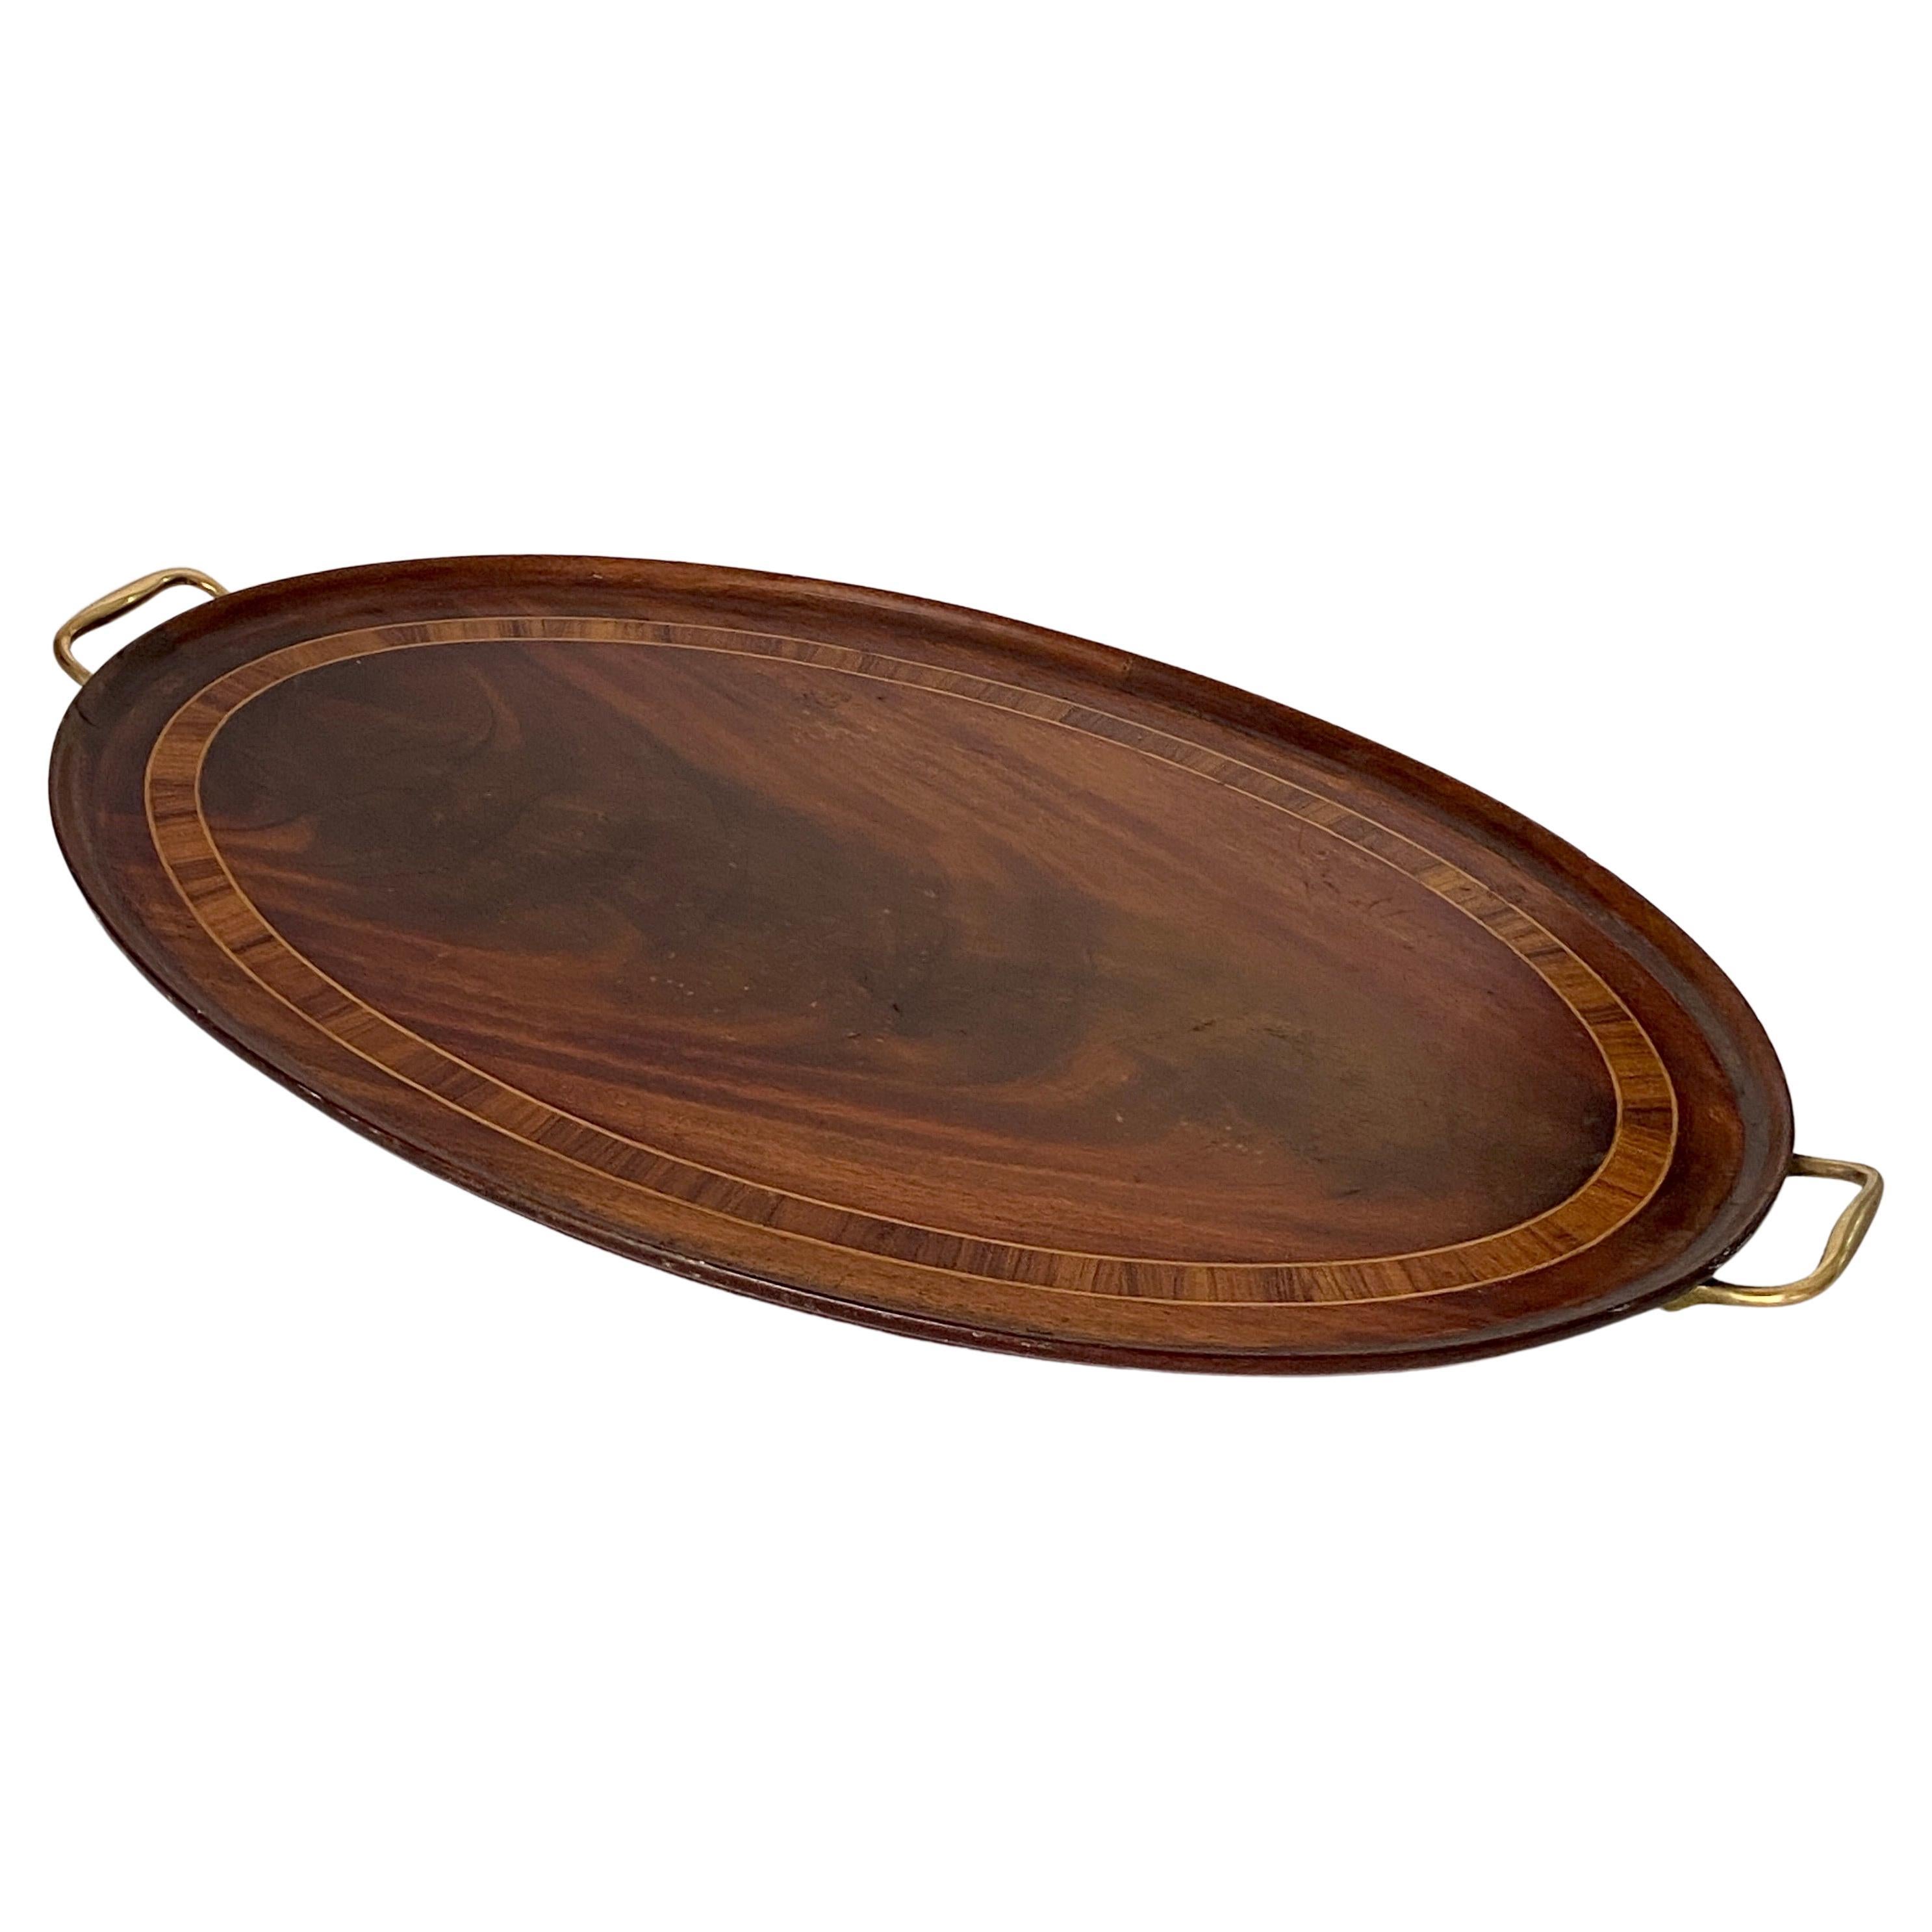 Large Art Deco Wood Marquetry Tray, Brown Color, Wood and Brass, France, 1940 For Sale